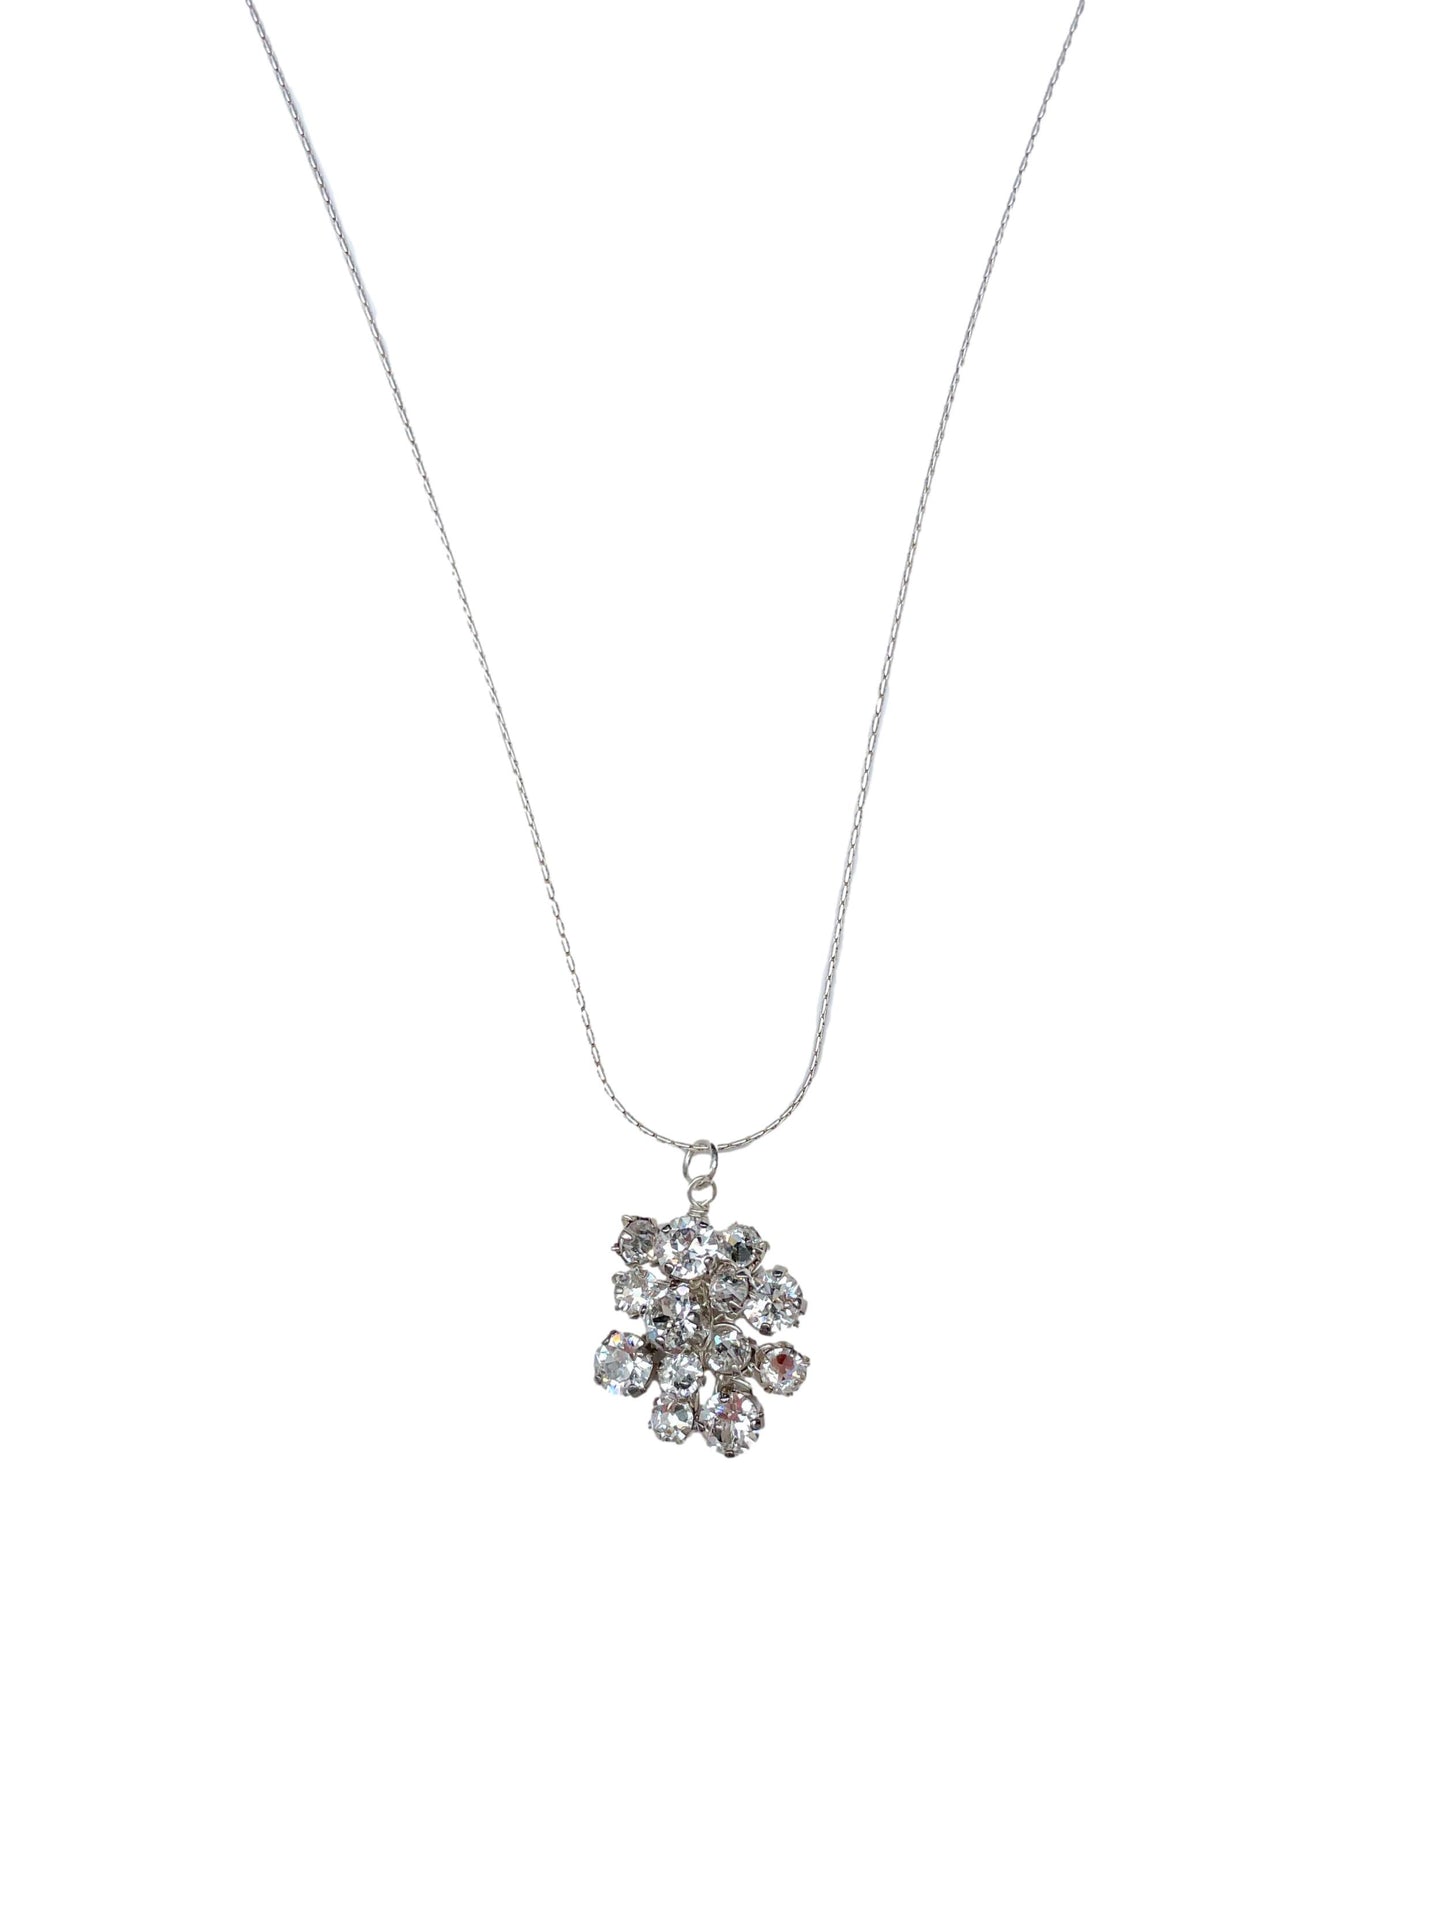 Penny Crystal Pendent Necklace